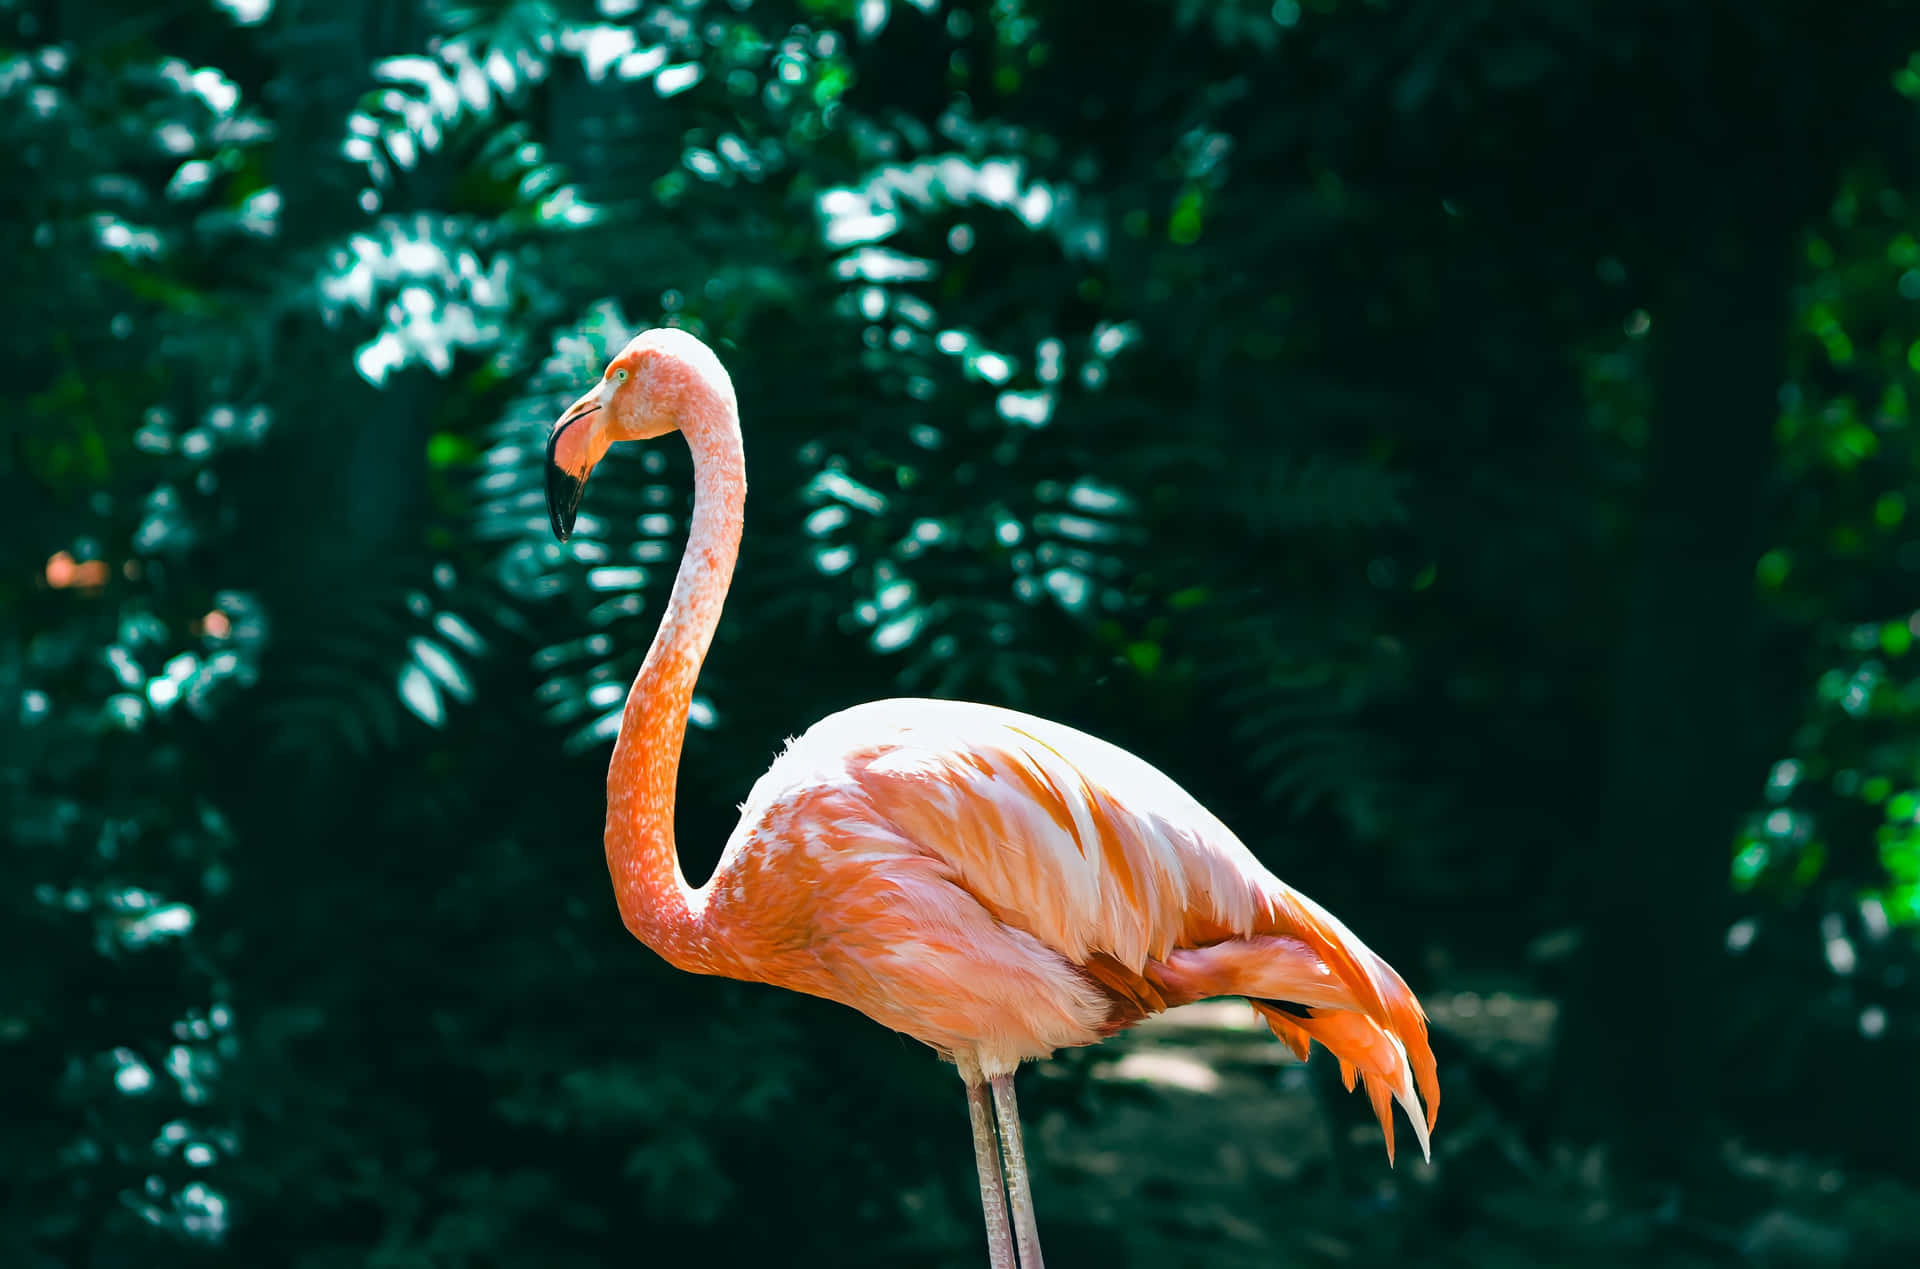 Say hello to summer with a vibrant Flamingo background!